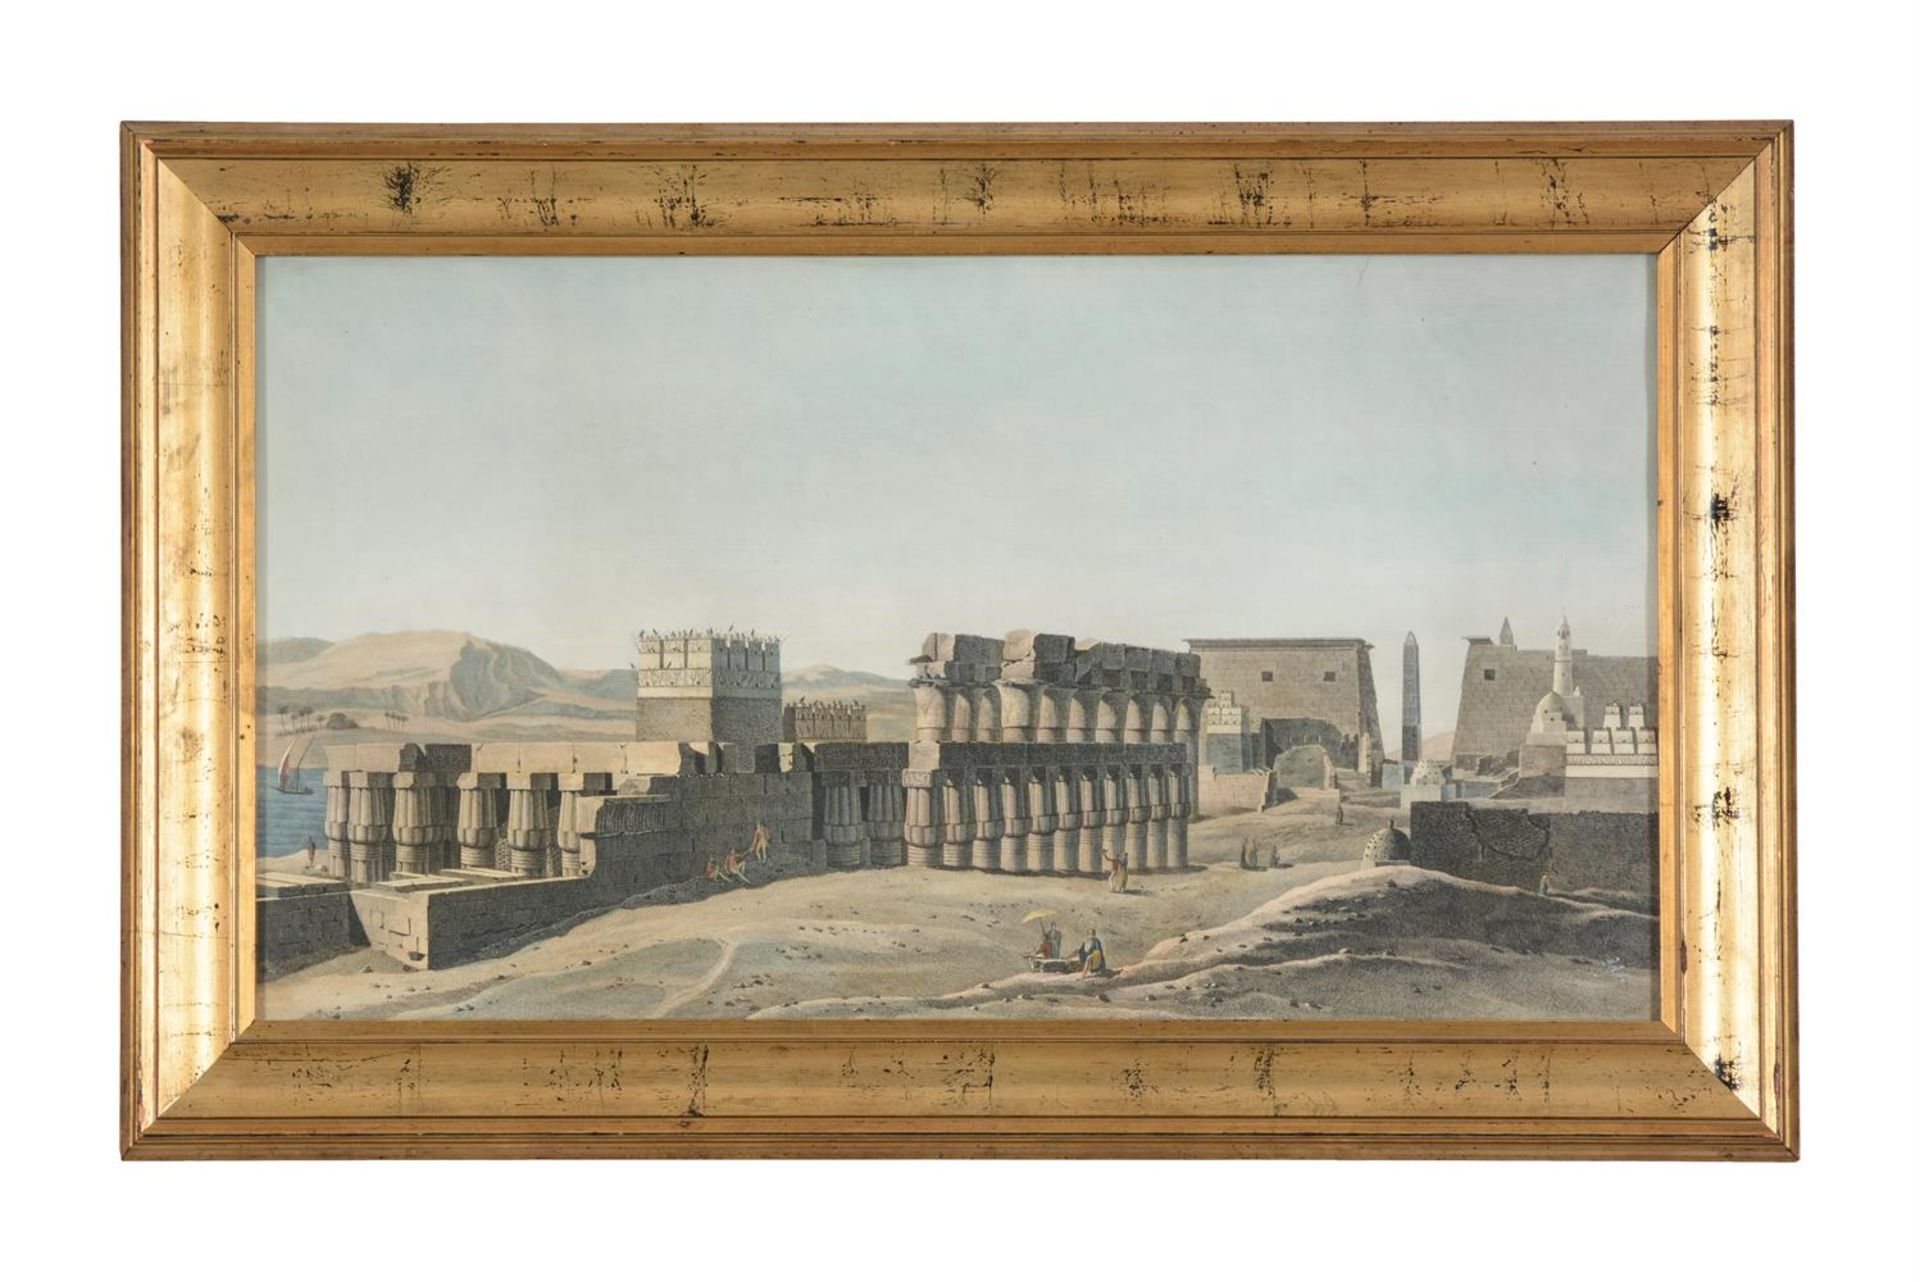 SIX HAND-COLOURED ENGRAVINGS OF EGYPT (LUXOR, KARNAK, DENDERA), EARLY 19TH CENTURY - Image 3 of 13